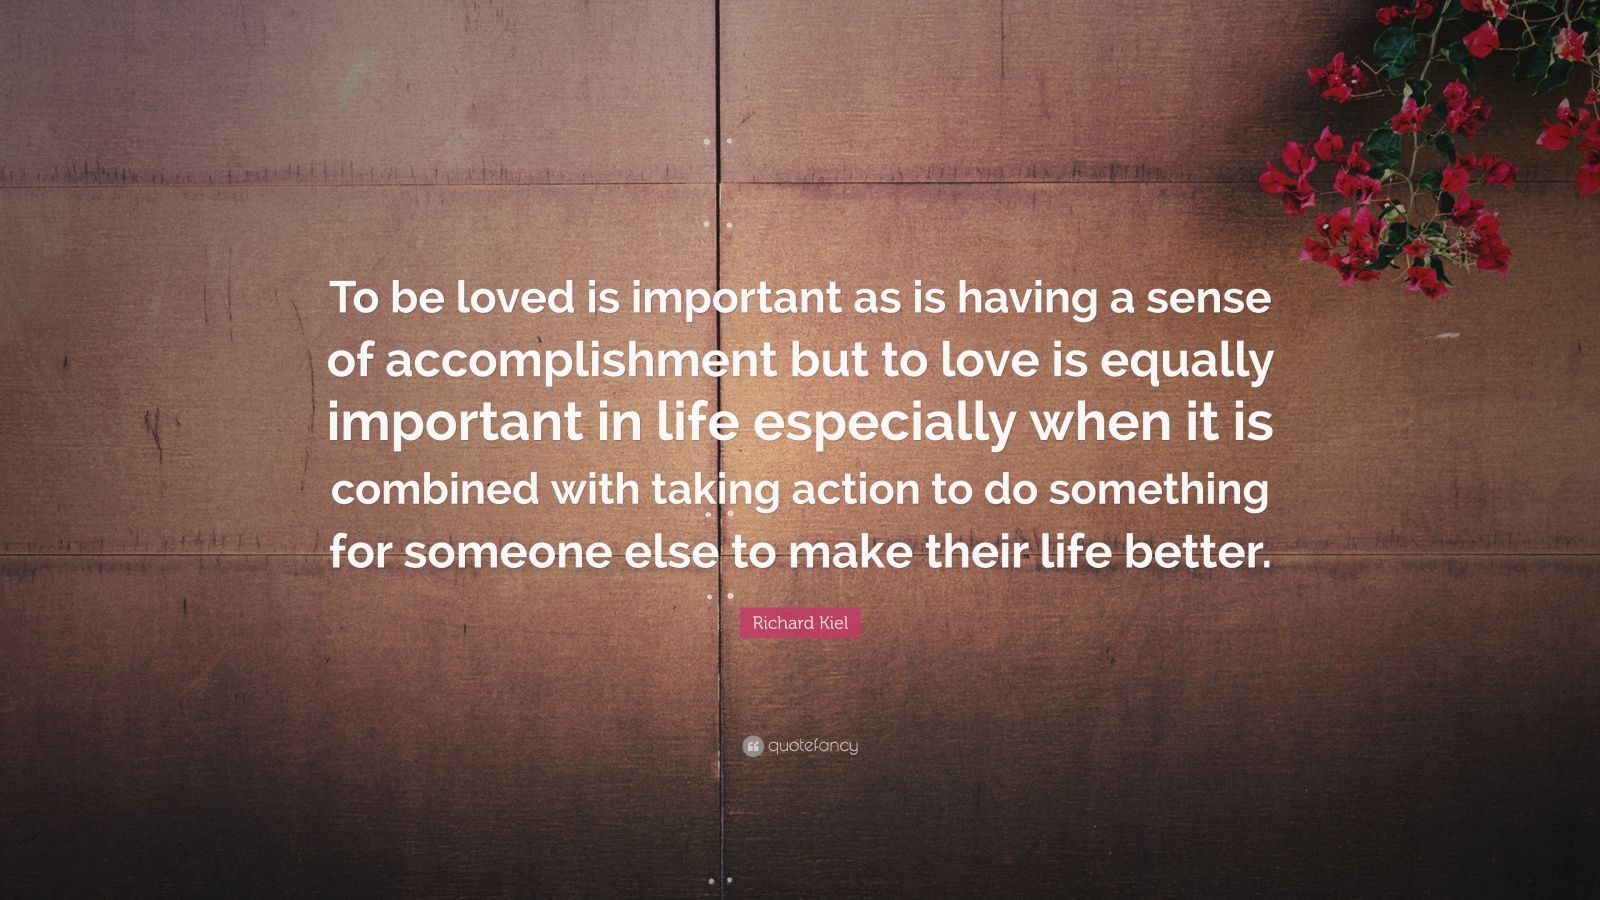 Richard Kiel Quote: “To be loved is important as is having a sense of ...